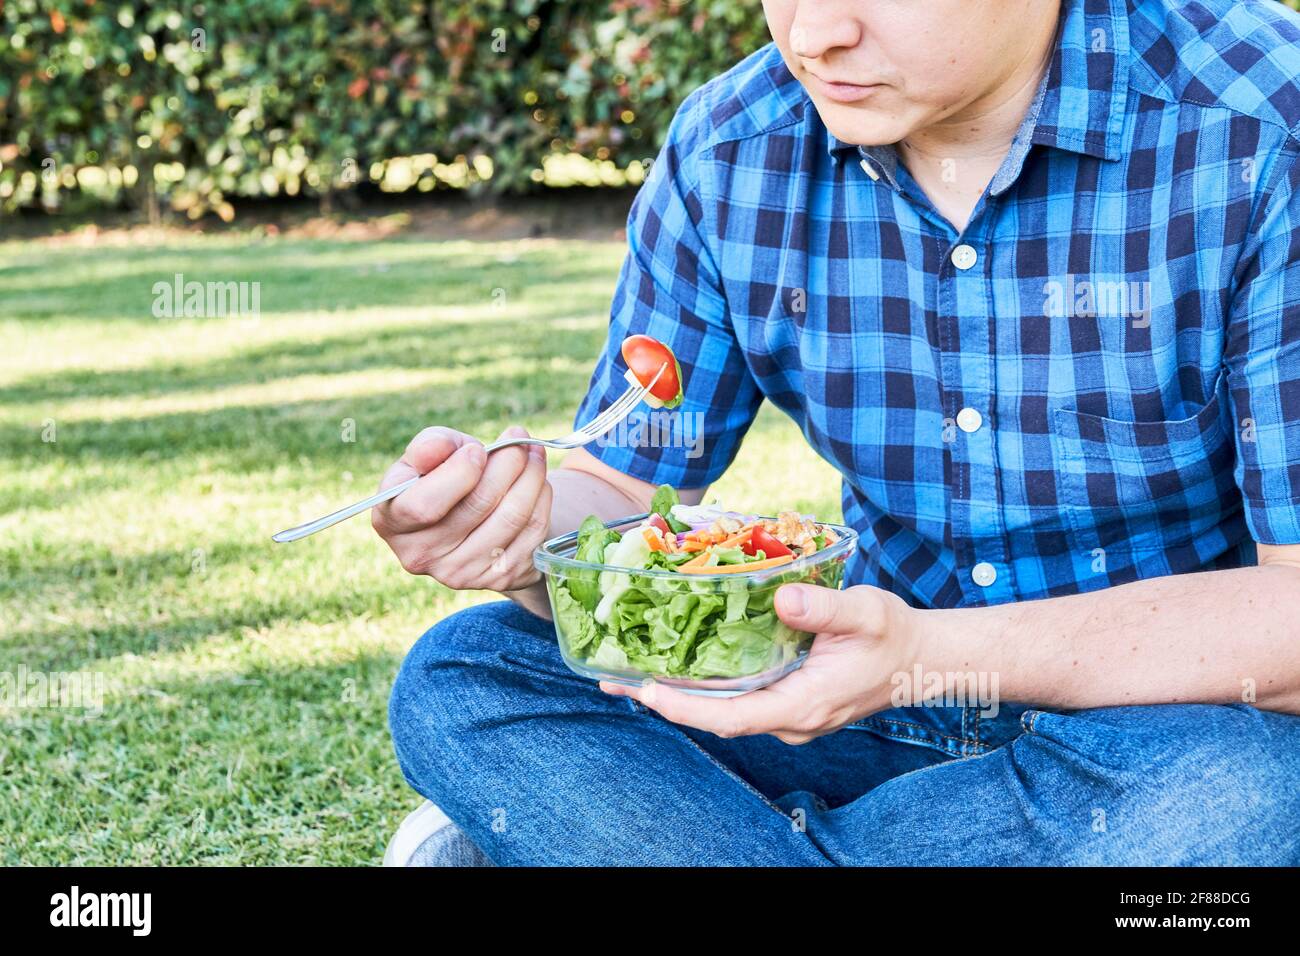 Unrecognizable young man sitting on the grass eating a fresh and colorful salad held in a glass bowl. Healthy living and eating concepts. Close up ima Stock Photo